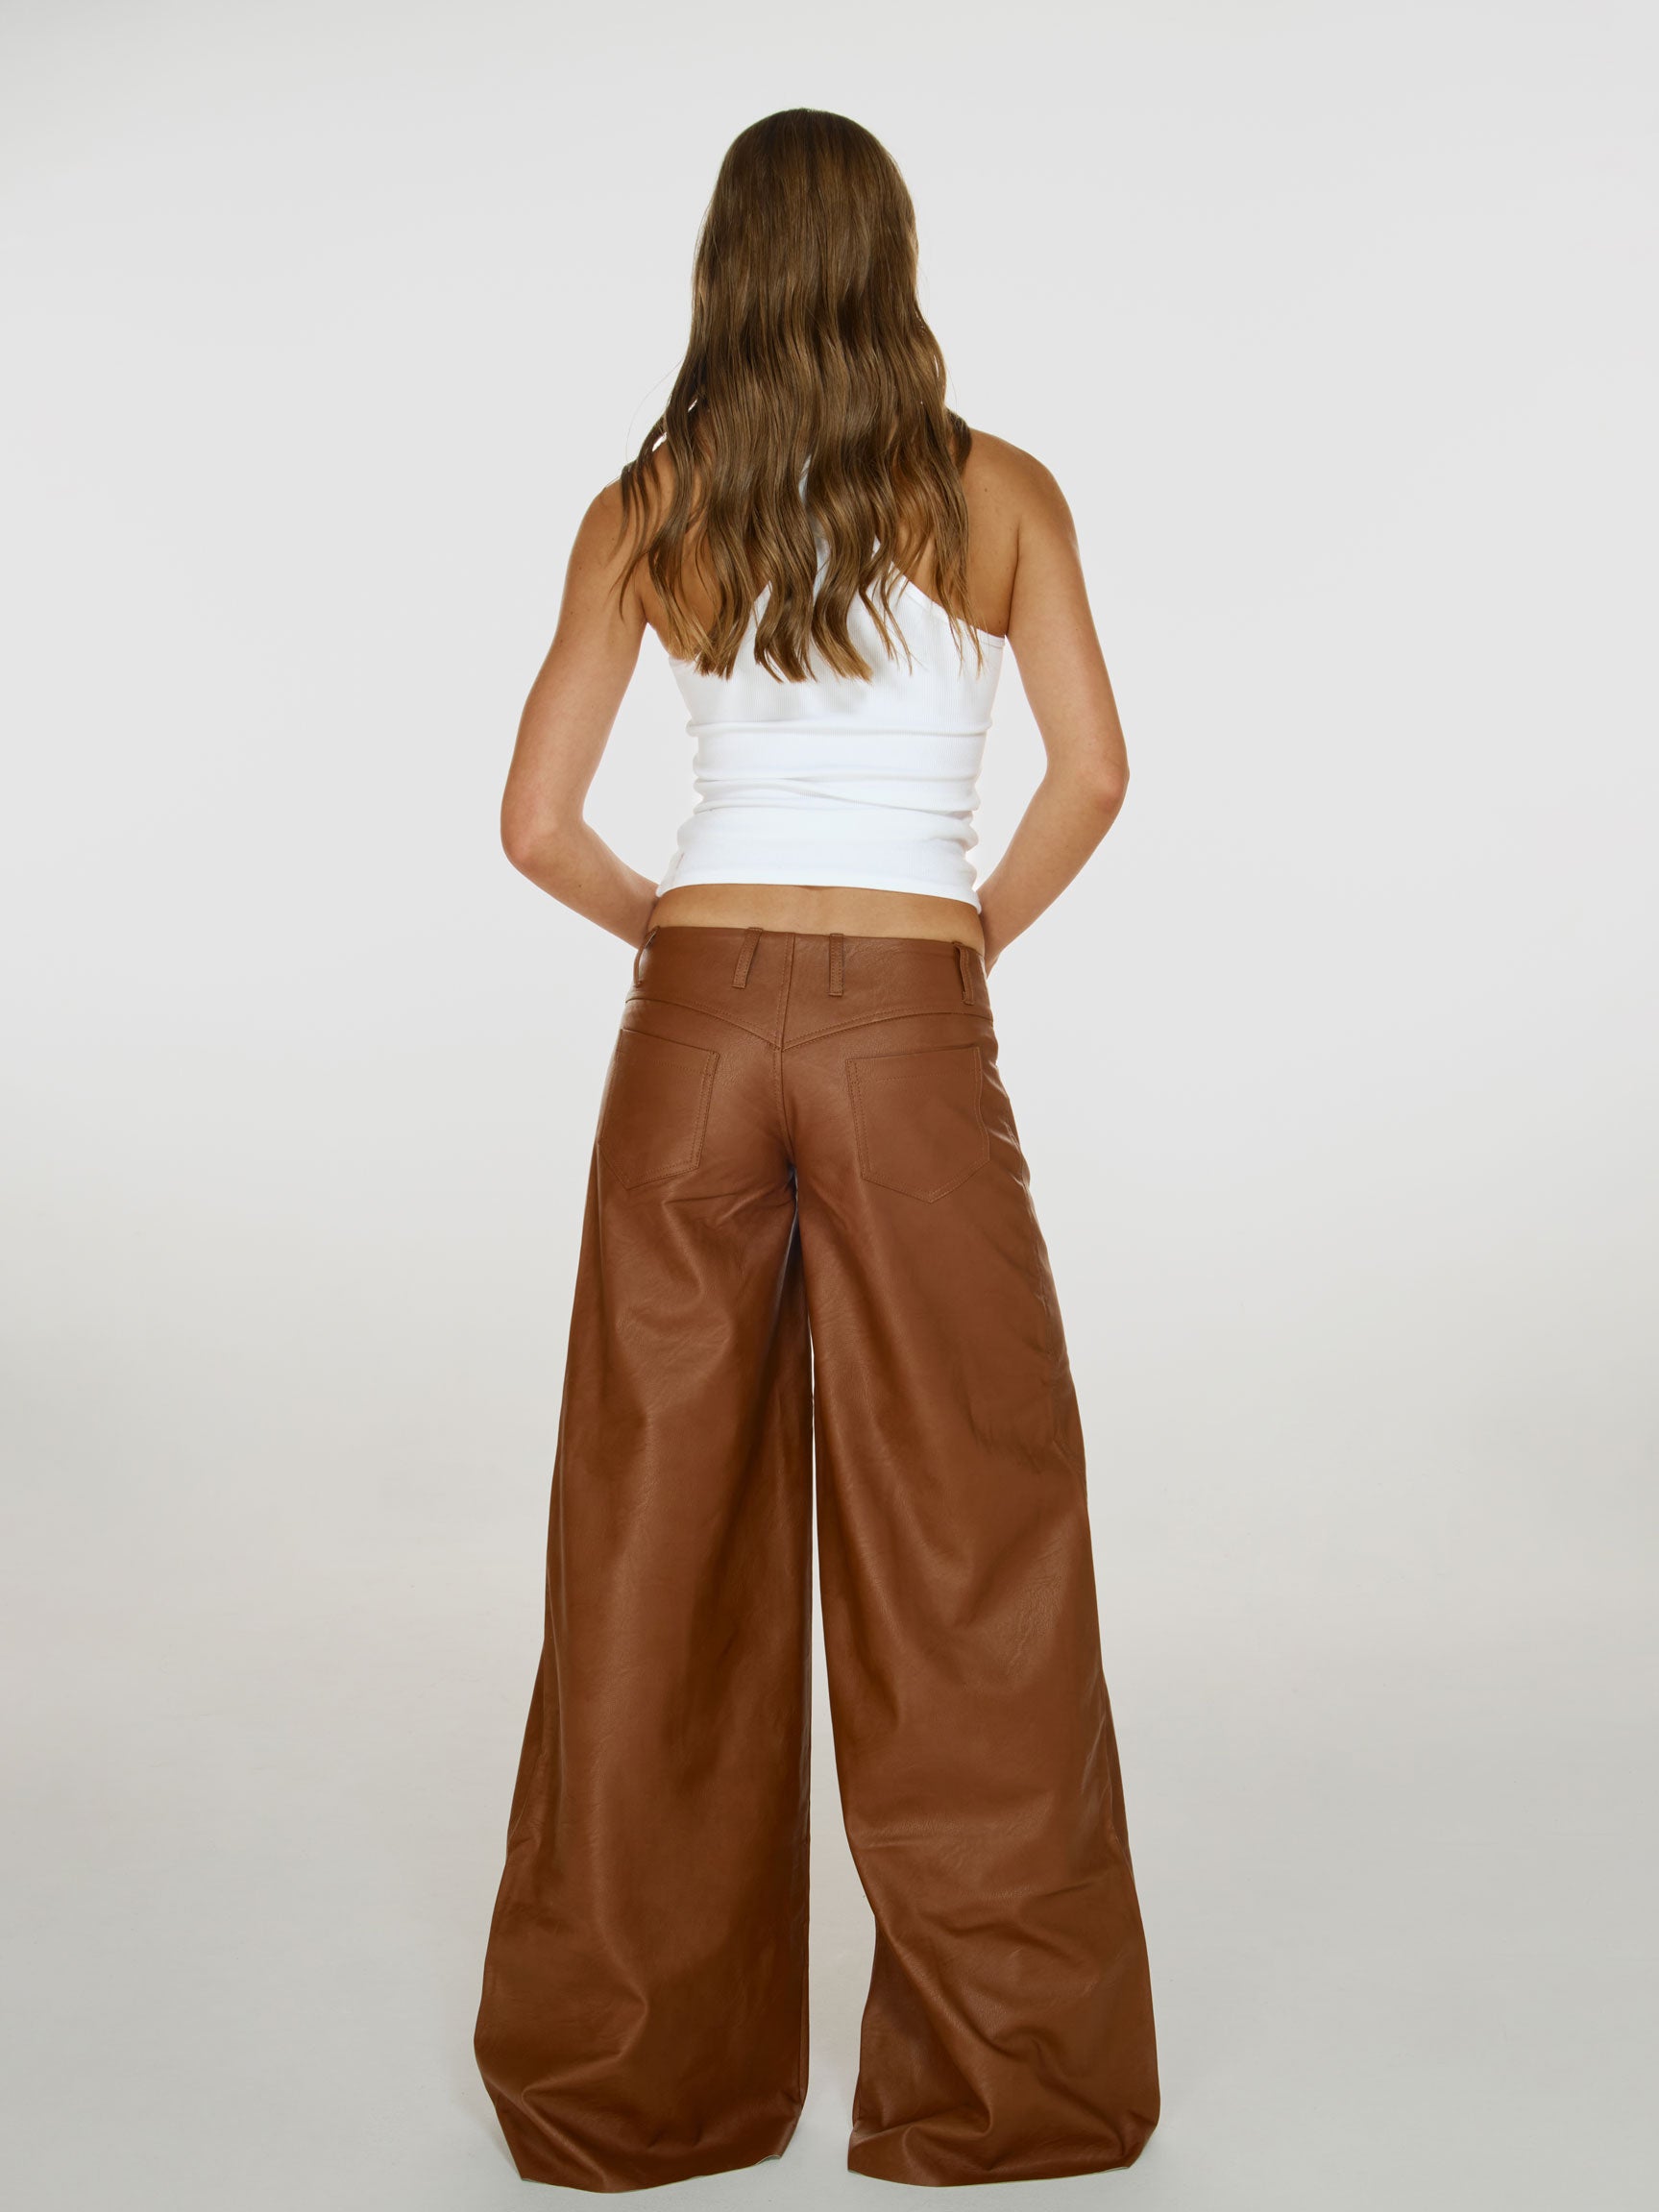 Full shot of a girl facing back in a white viscose tank top and brown vegan leather low rise wide leg pants